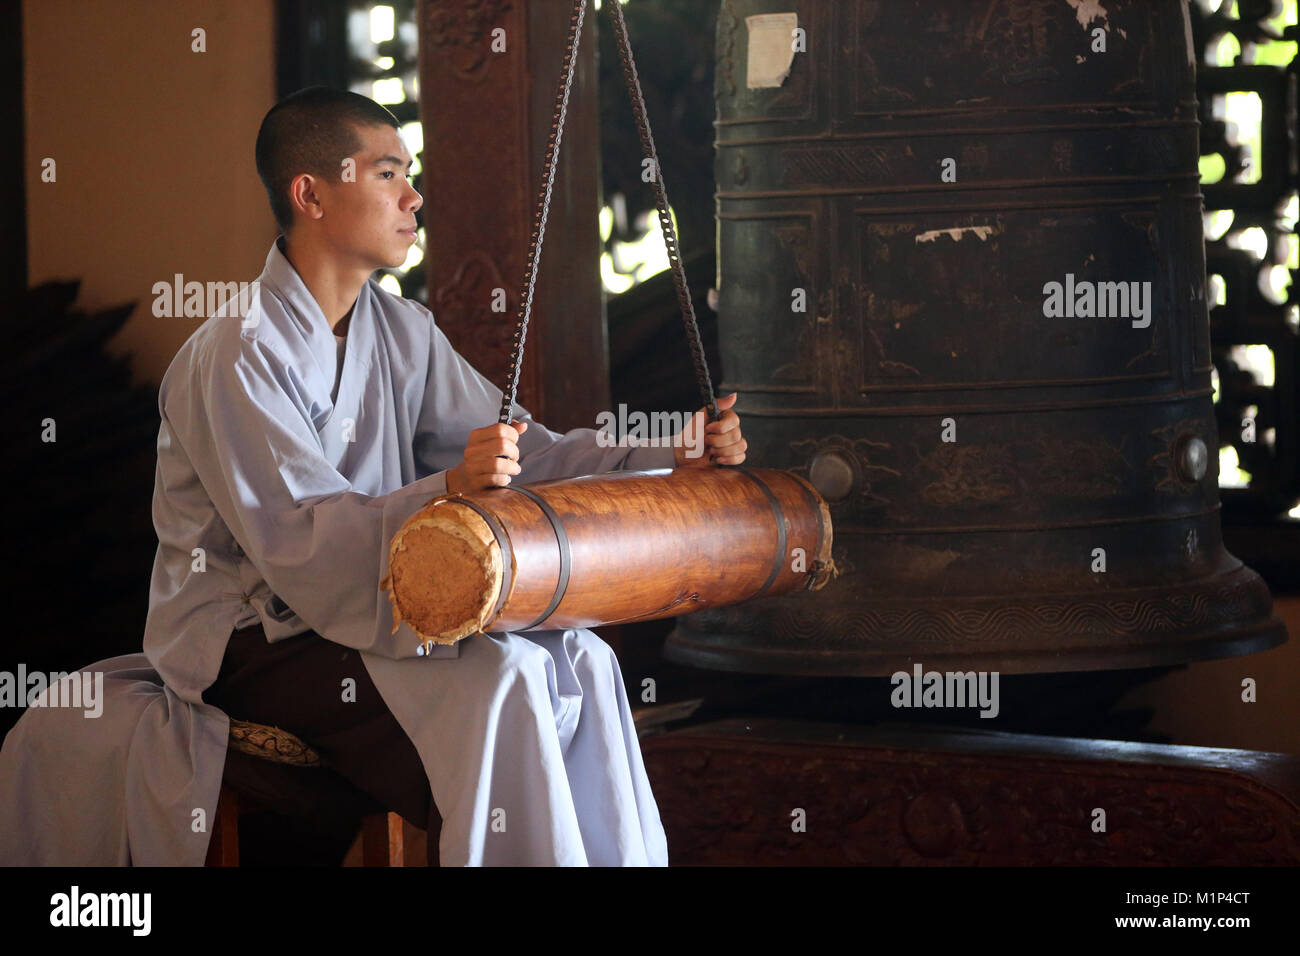 Linh An Buddhist pagoda, young monk ringing bell in monastery, Dalat, Vietnam, Indochina, Southeast Asia, Asia Stock Photo